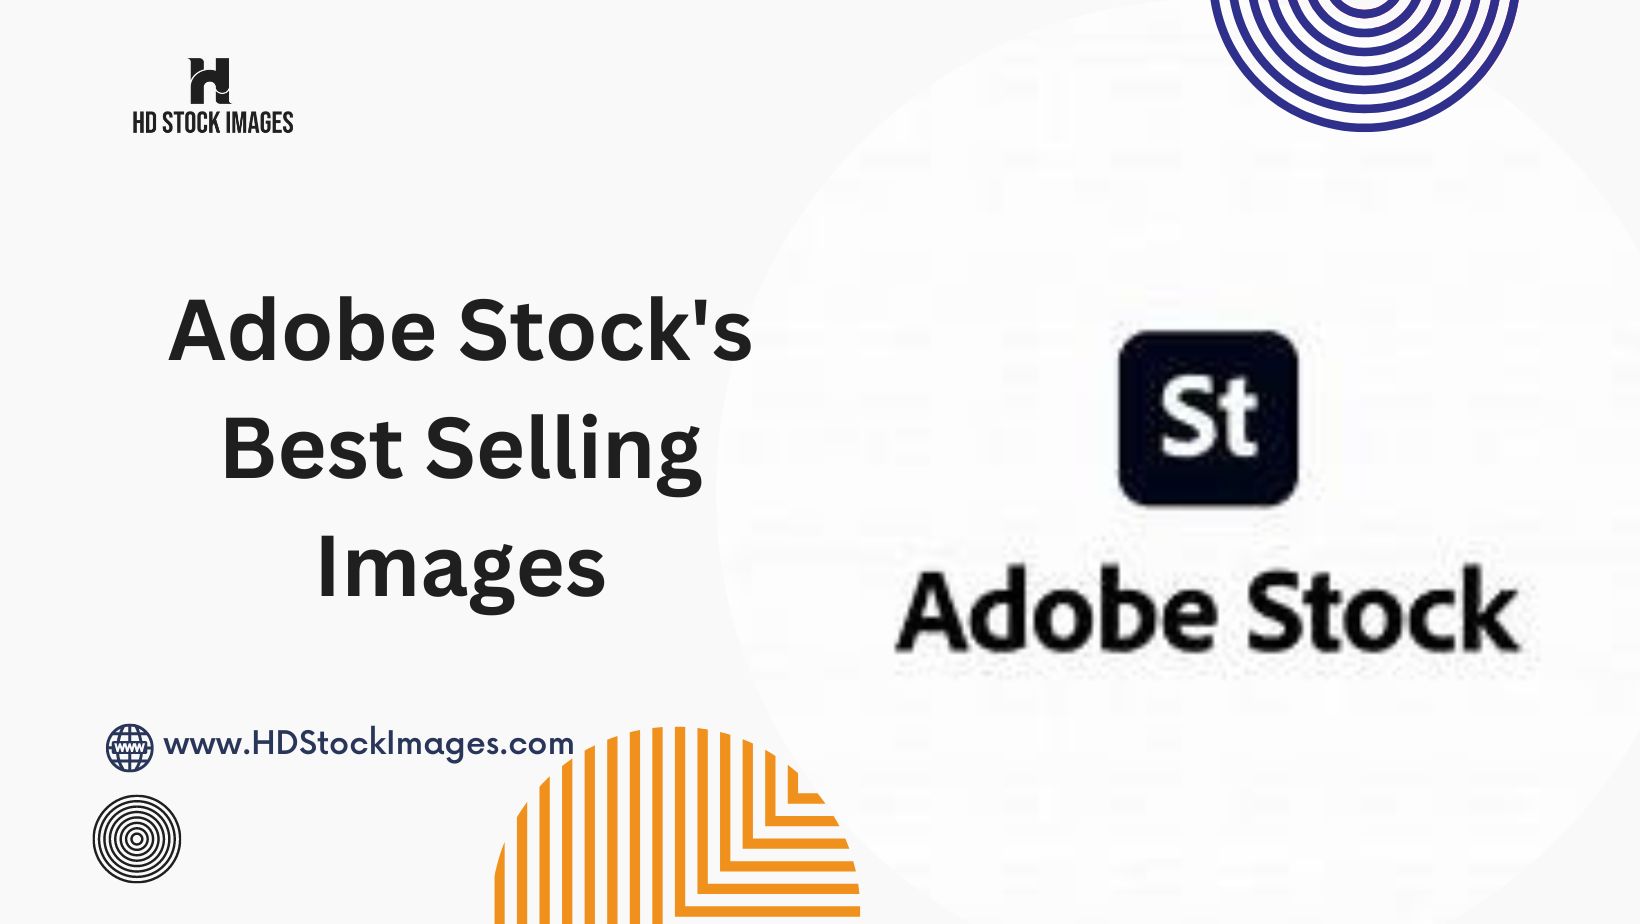 An image of Insights into Popular and Profitable Content: Adobe Stock's Best Selling Images